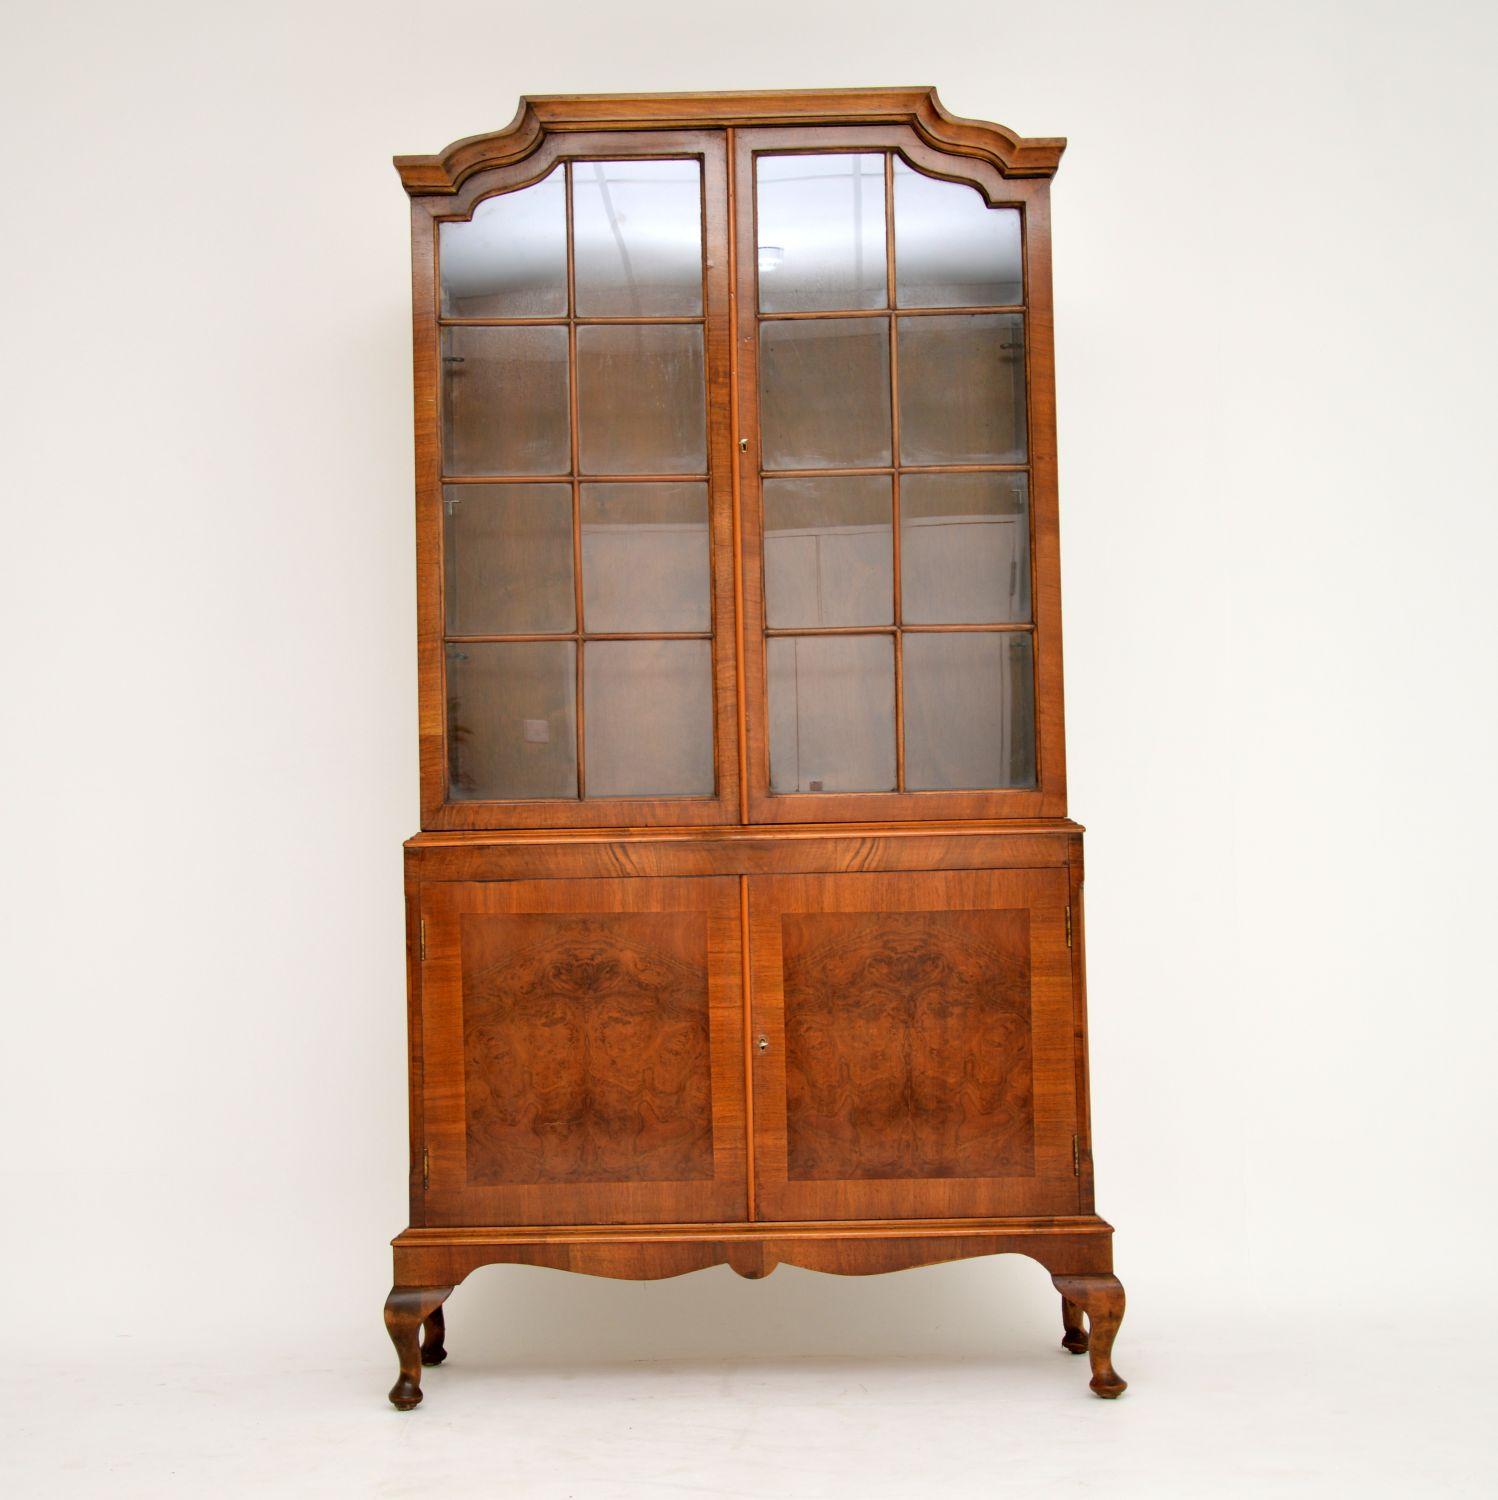 Antique two-section astral-glazed walnut bookcase with a burr walnut panelled cupboard below and sitting on Queen Anne feet. It has a shaped top and the bottom section has chamfered edges. There are adjustable shelves in the top section and a loose